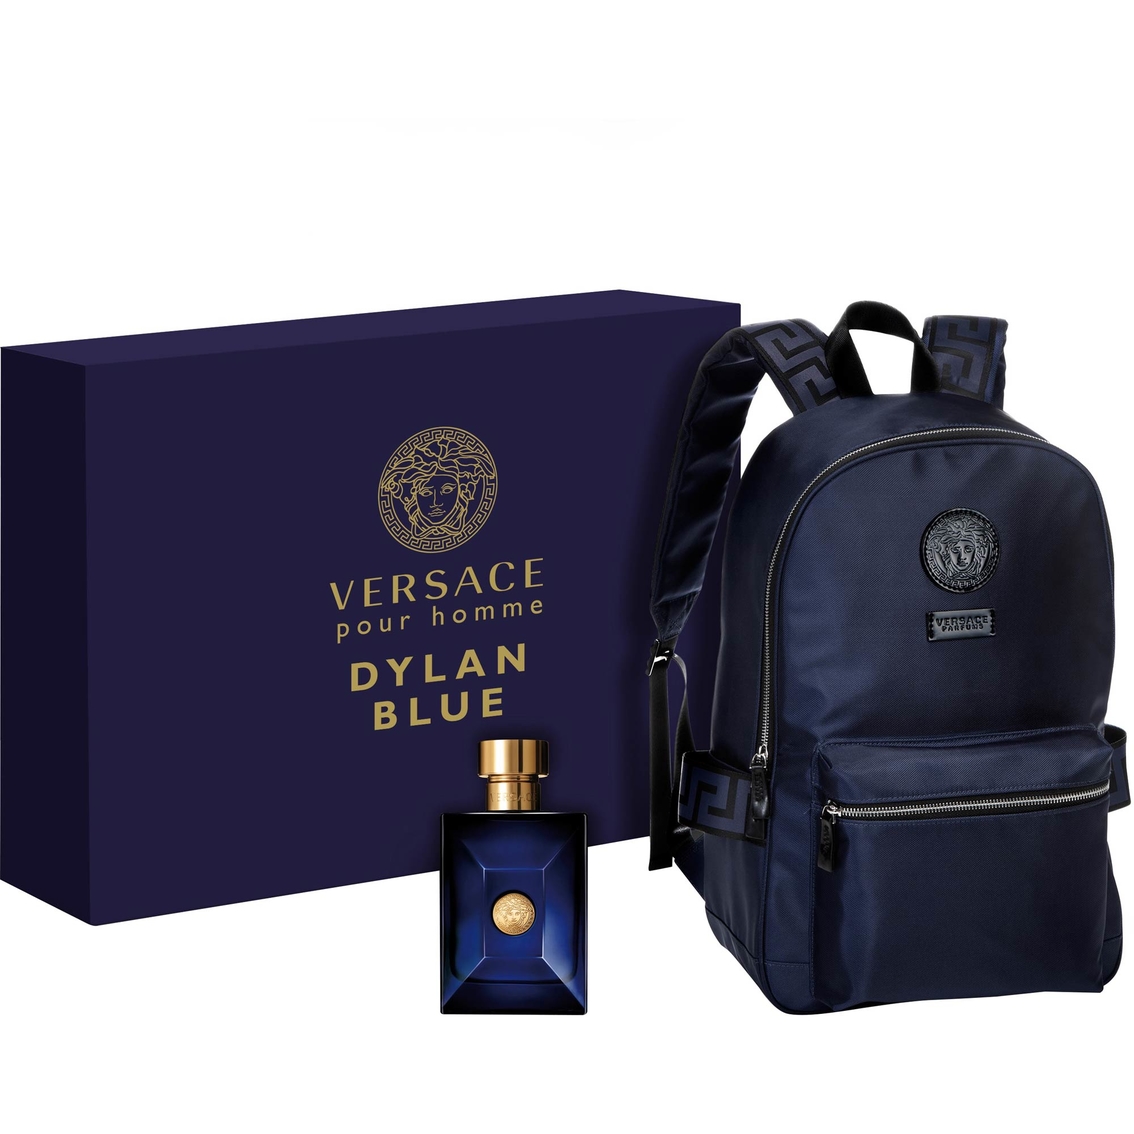 versace perfume and bag offer